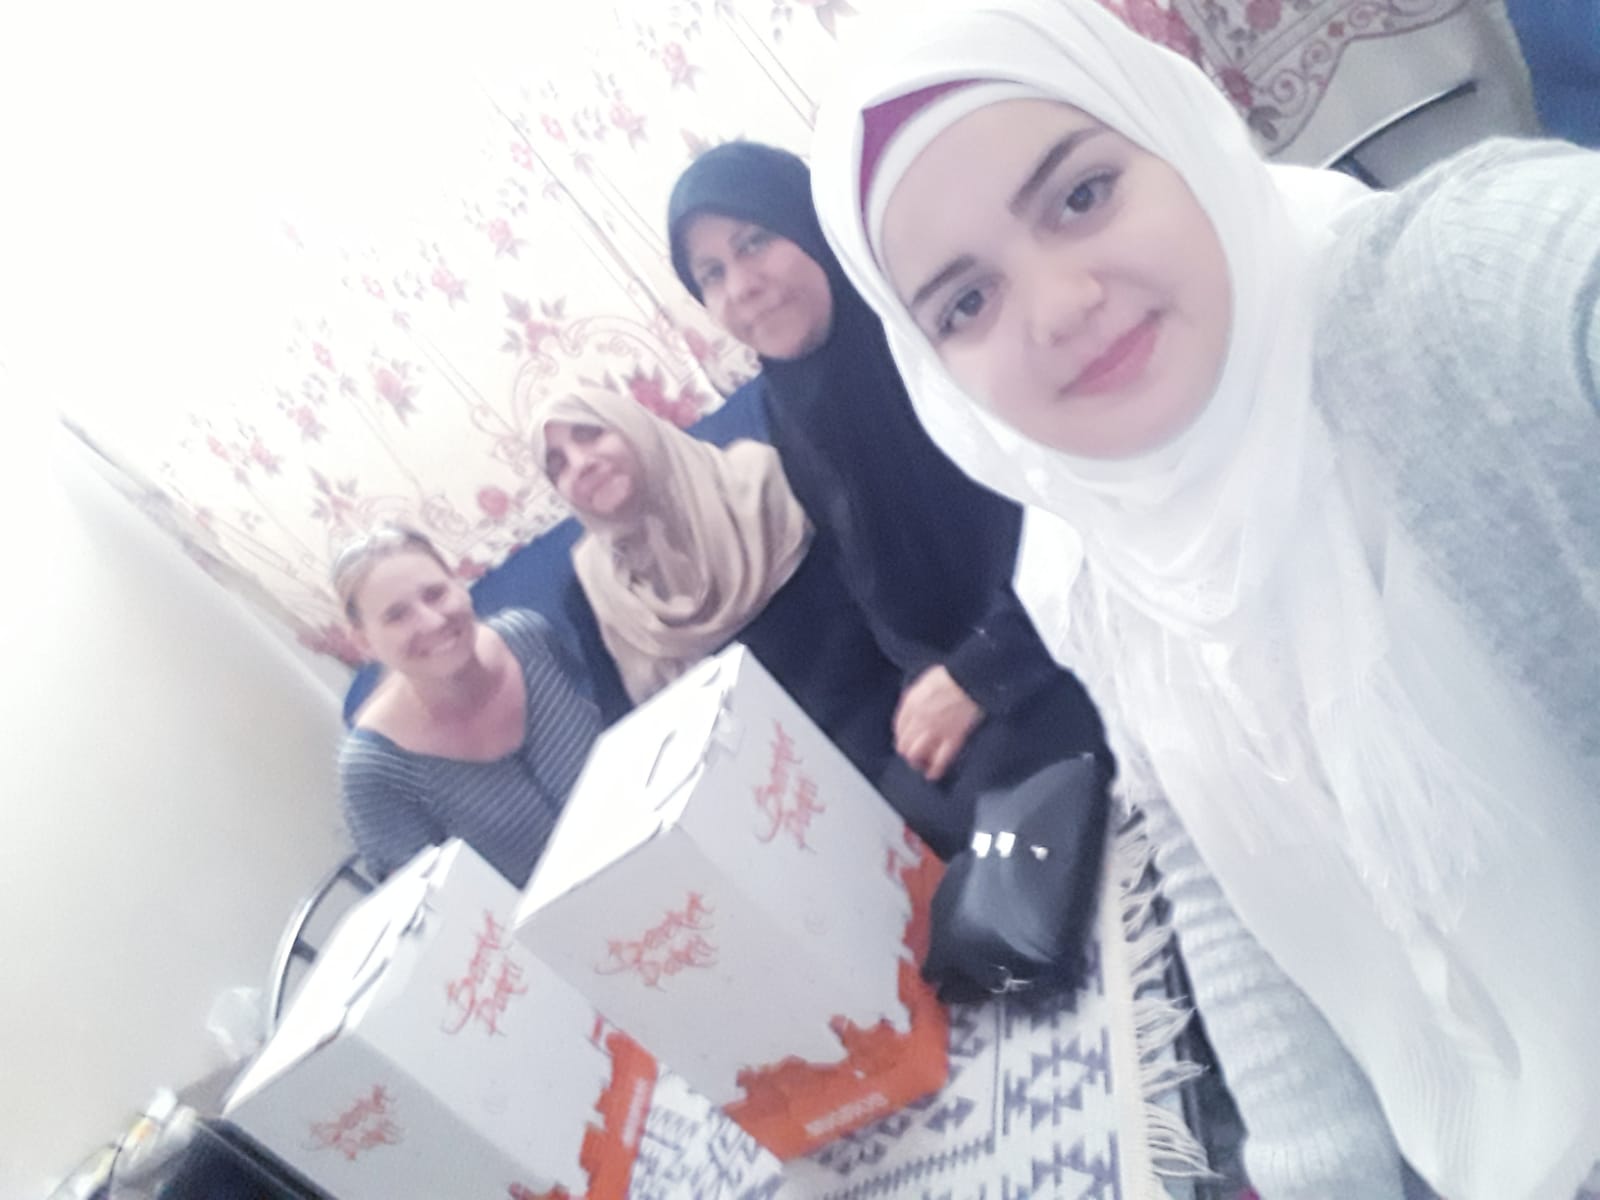 Delivering Ramadan care packages - World Hunger Day